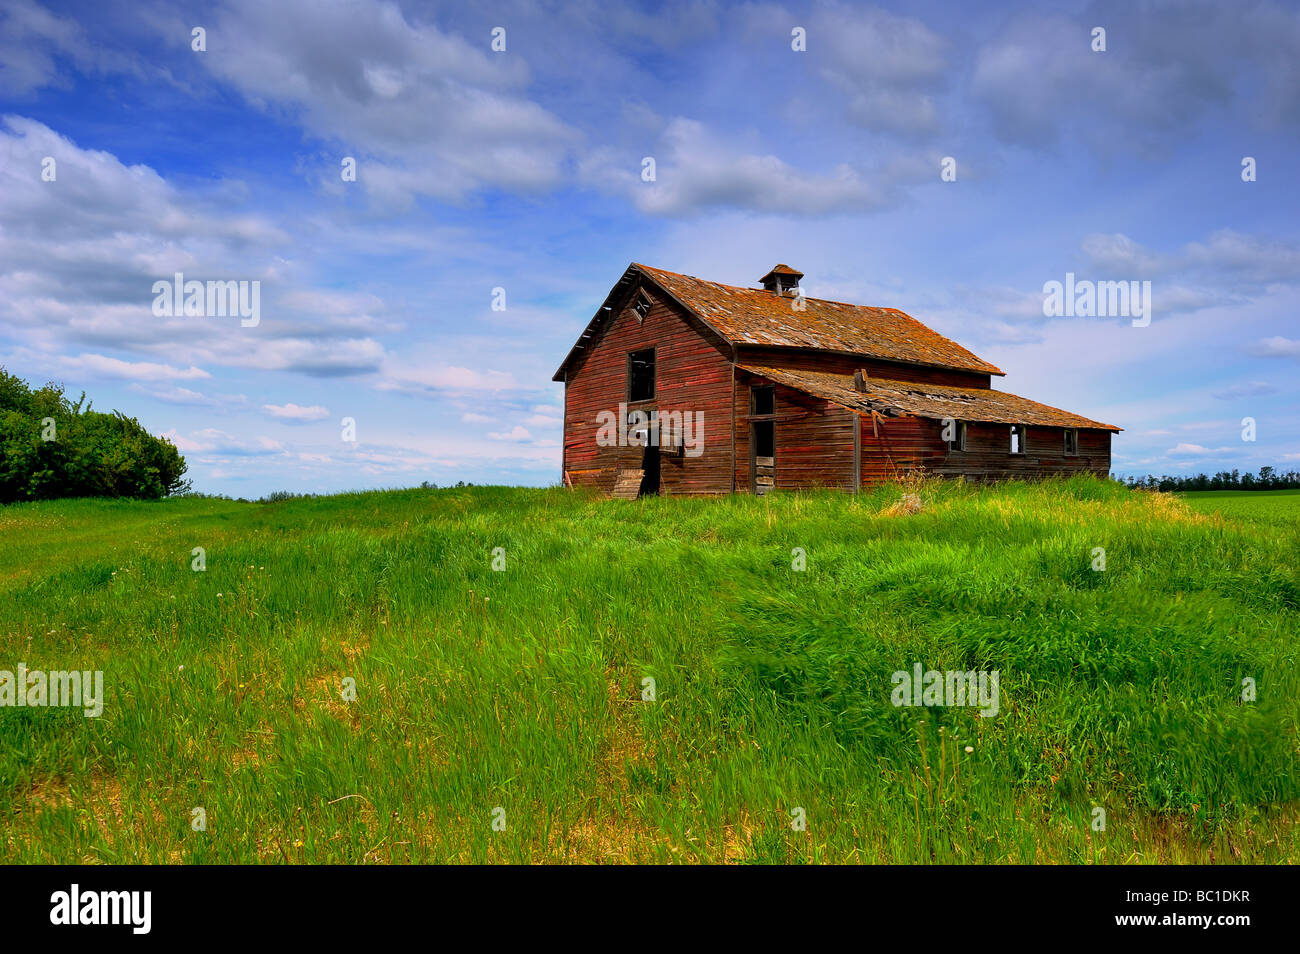 An Old Abandoned Red Barn In Rural Alberta Canada Stock Photo